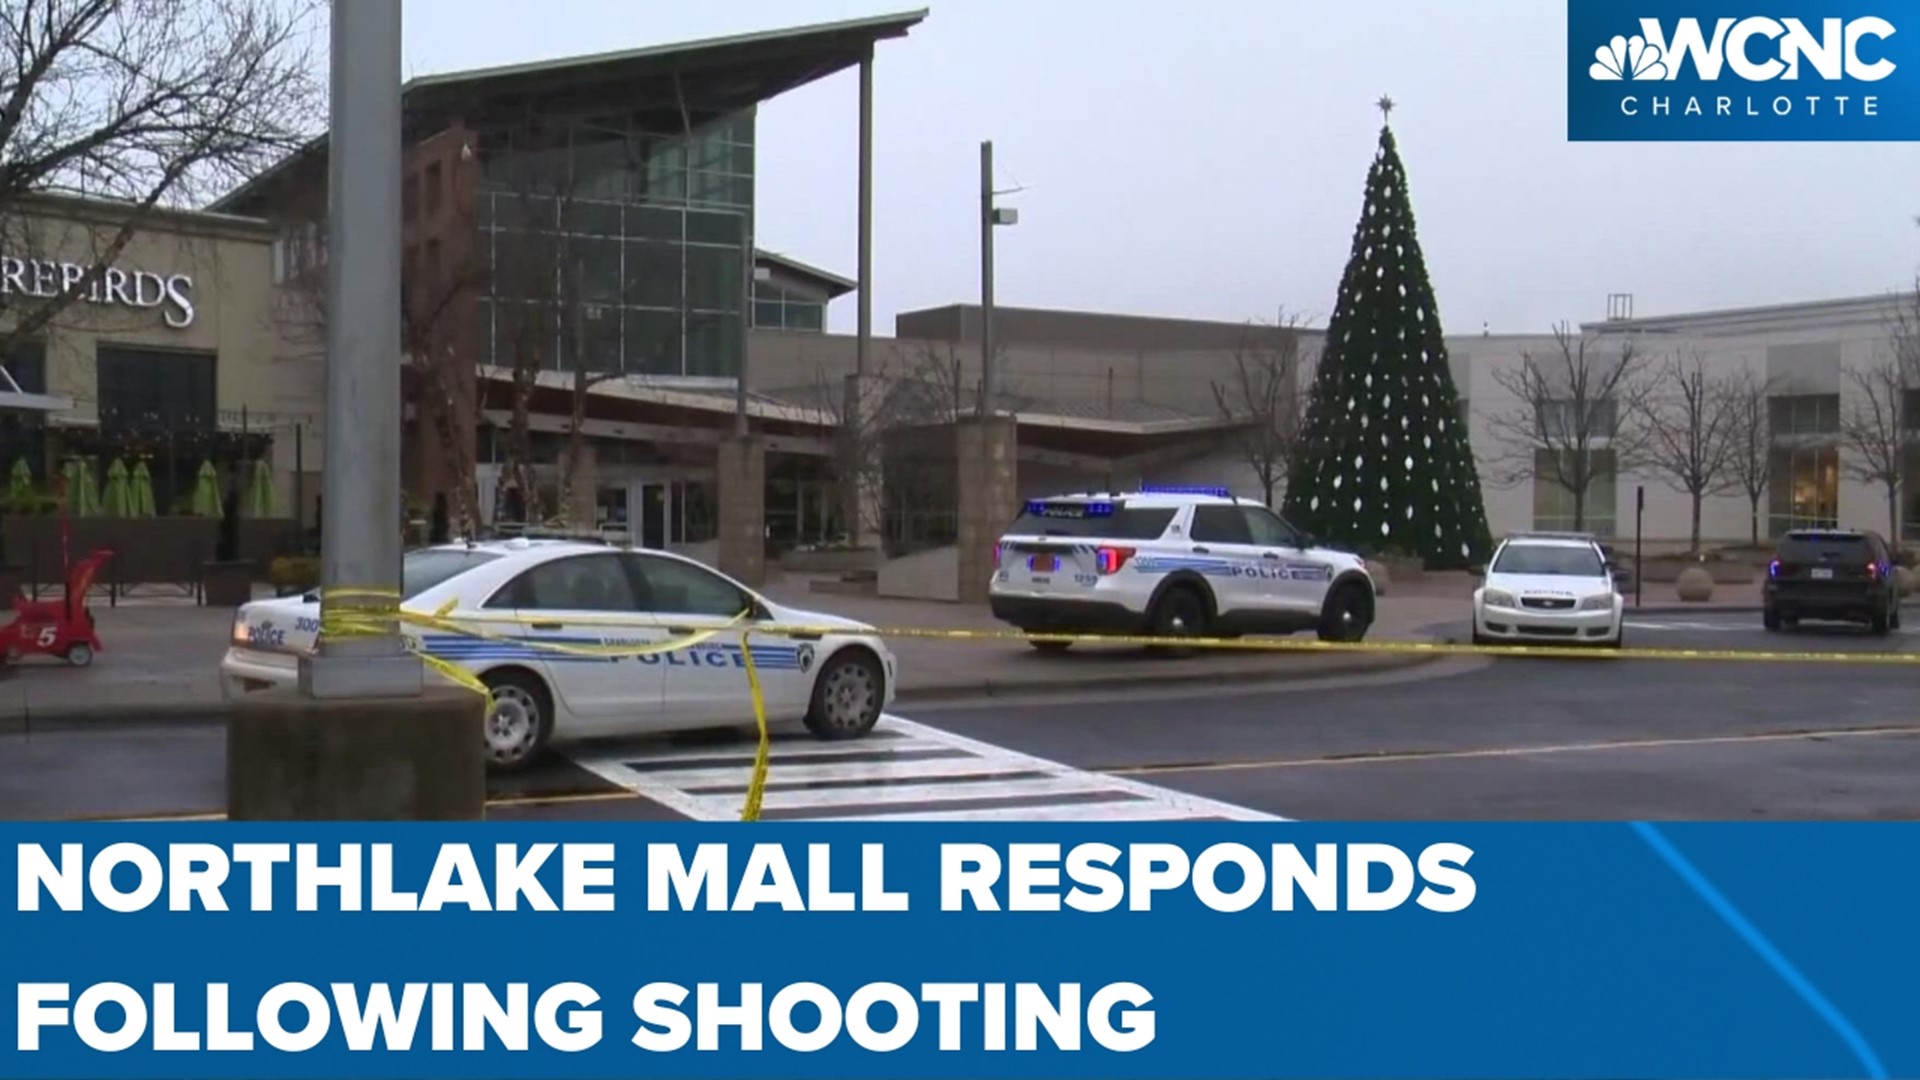 The Northlake Mall is rolling out extra security measures after several recent shootings at the mall.